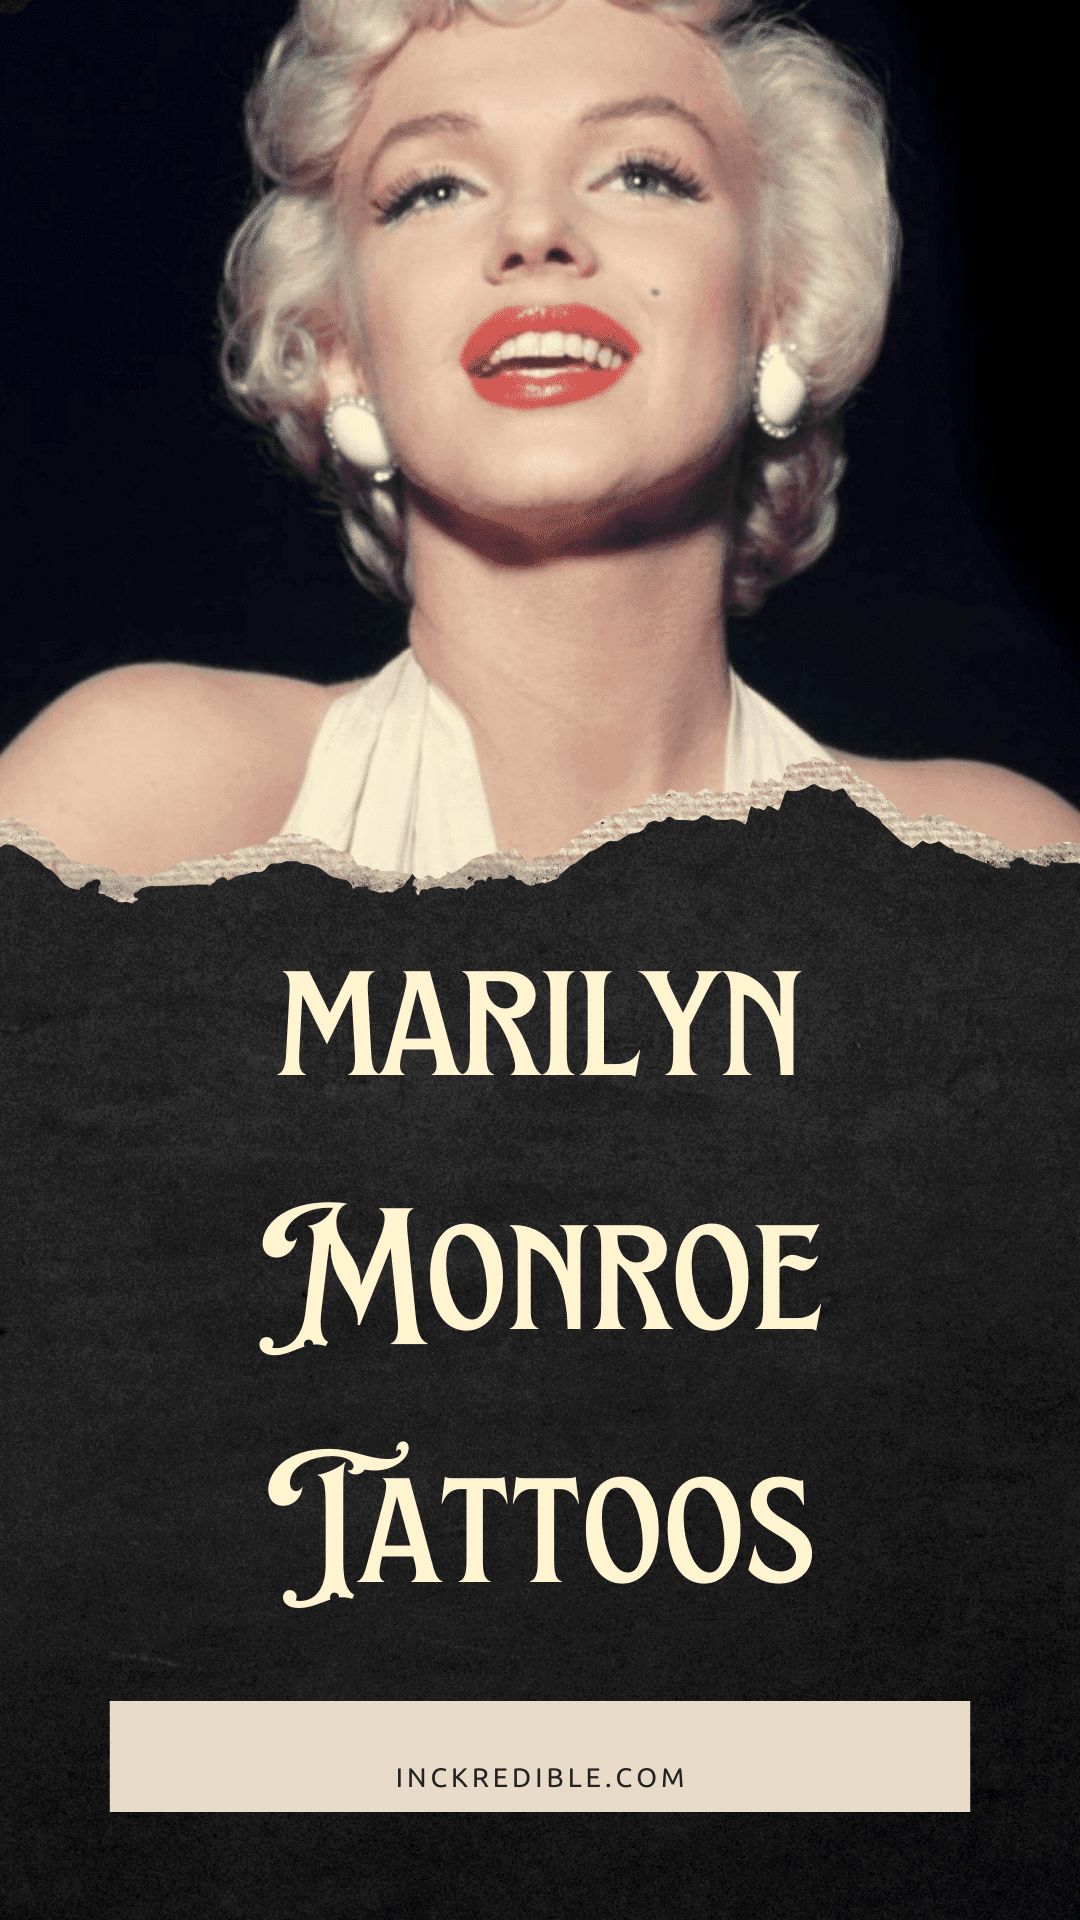 marilyn monroe with tattoos and smoking